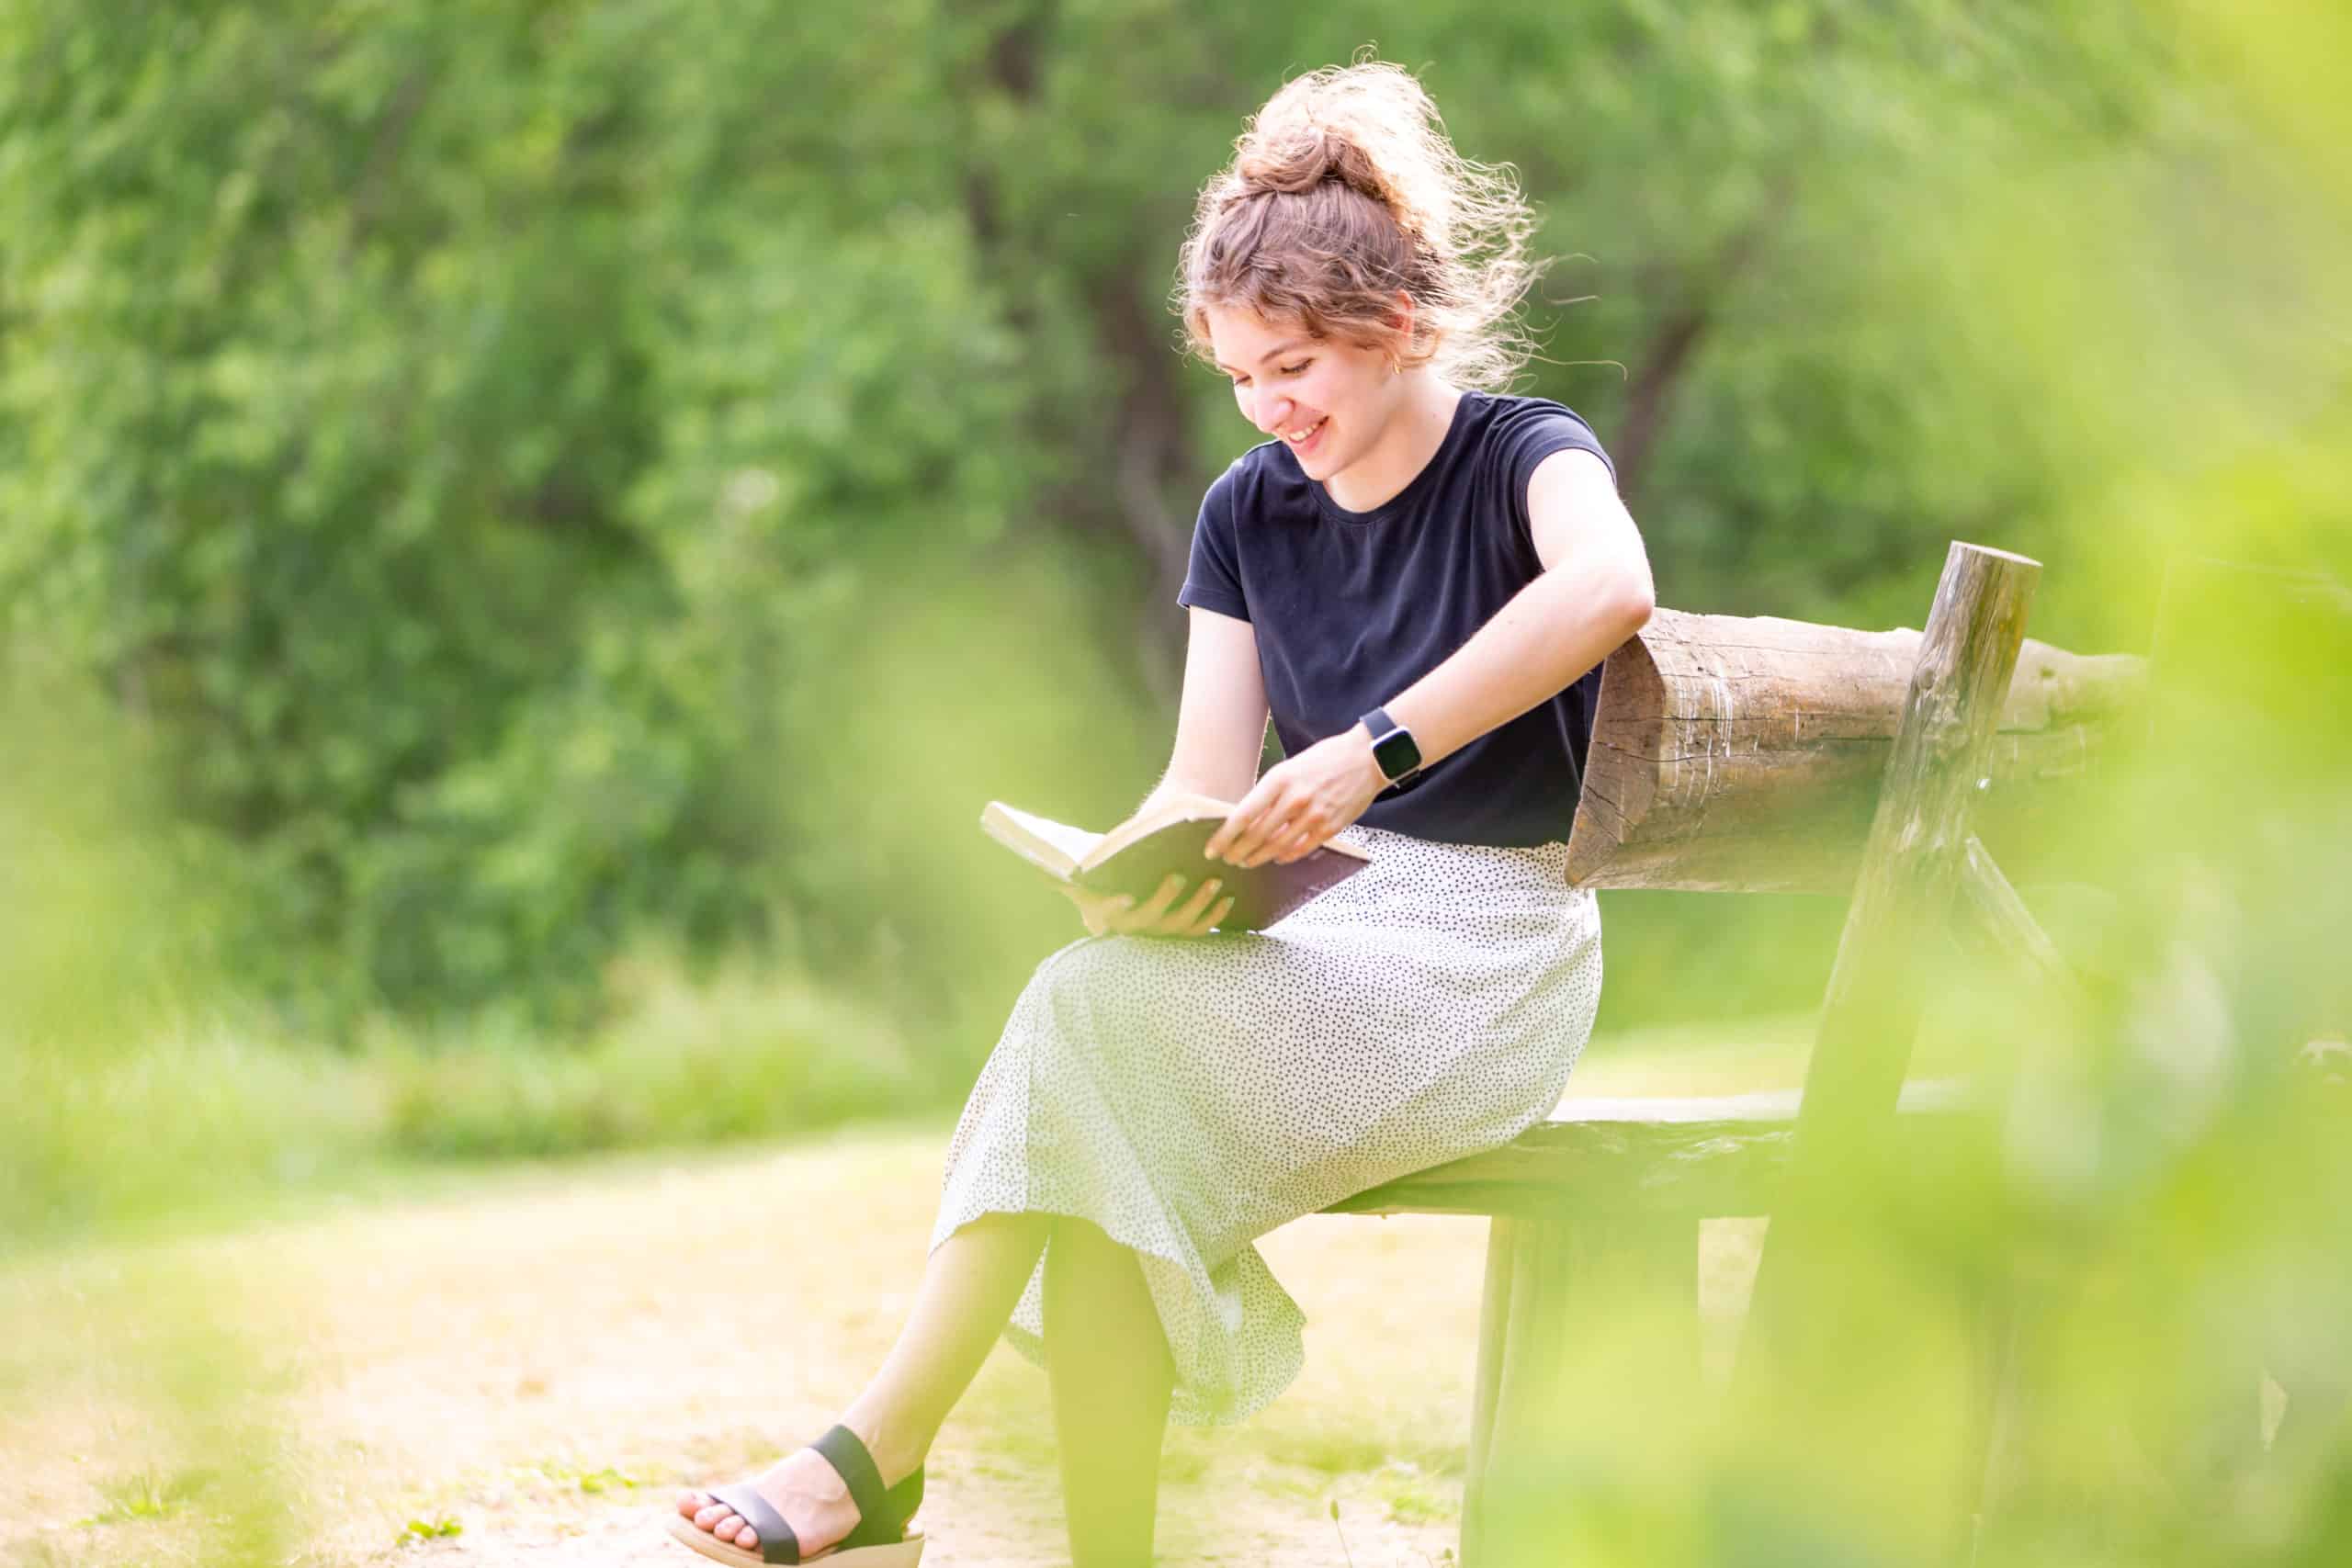 Woman smiling as she reads a book on a bench.